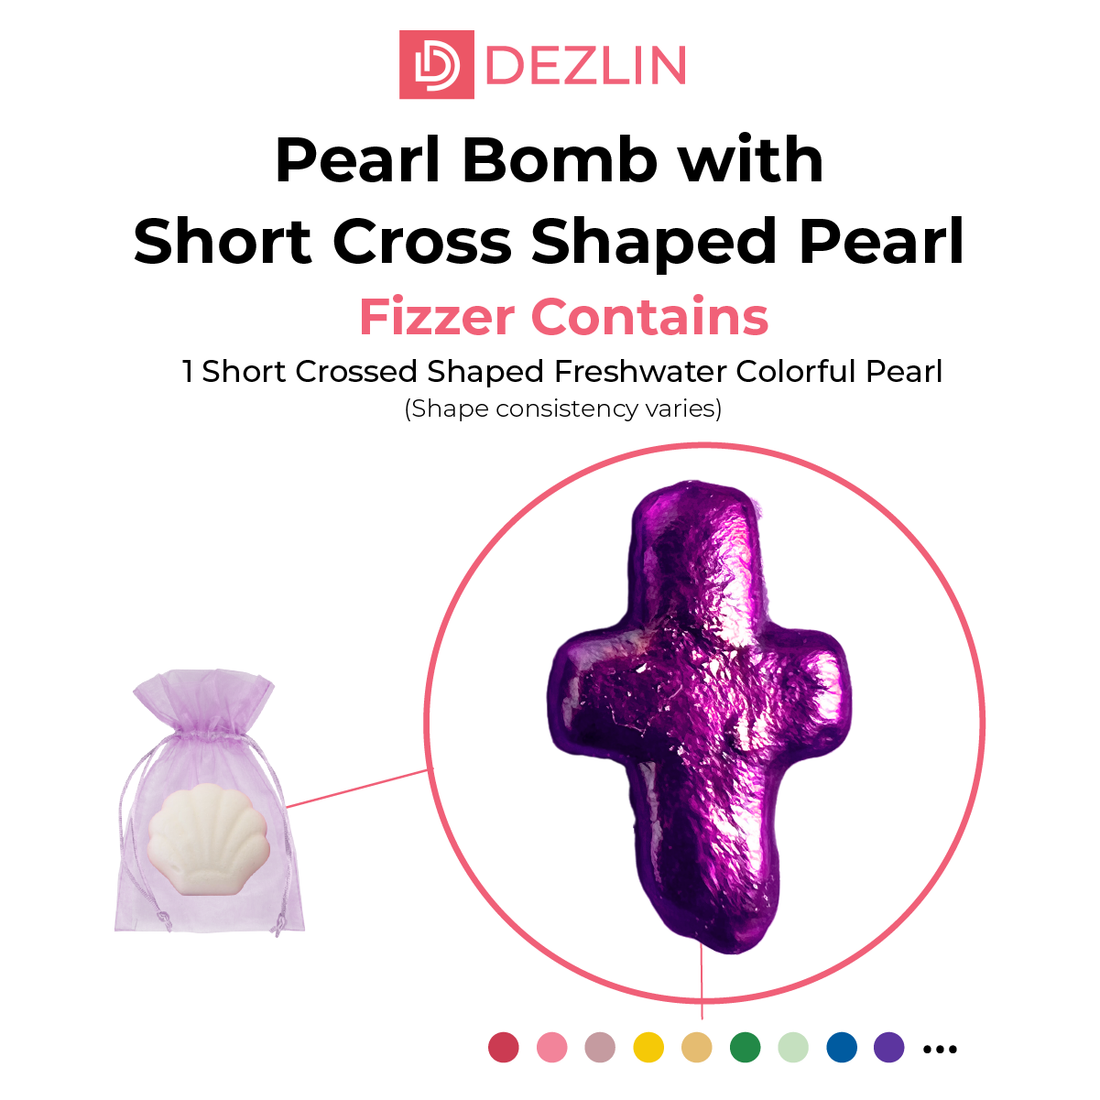 Pearl Bomb with Short Cross Shaped Pearl